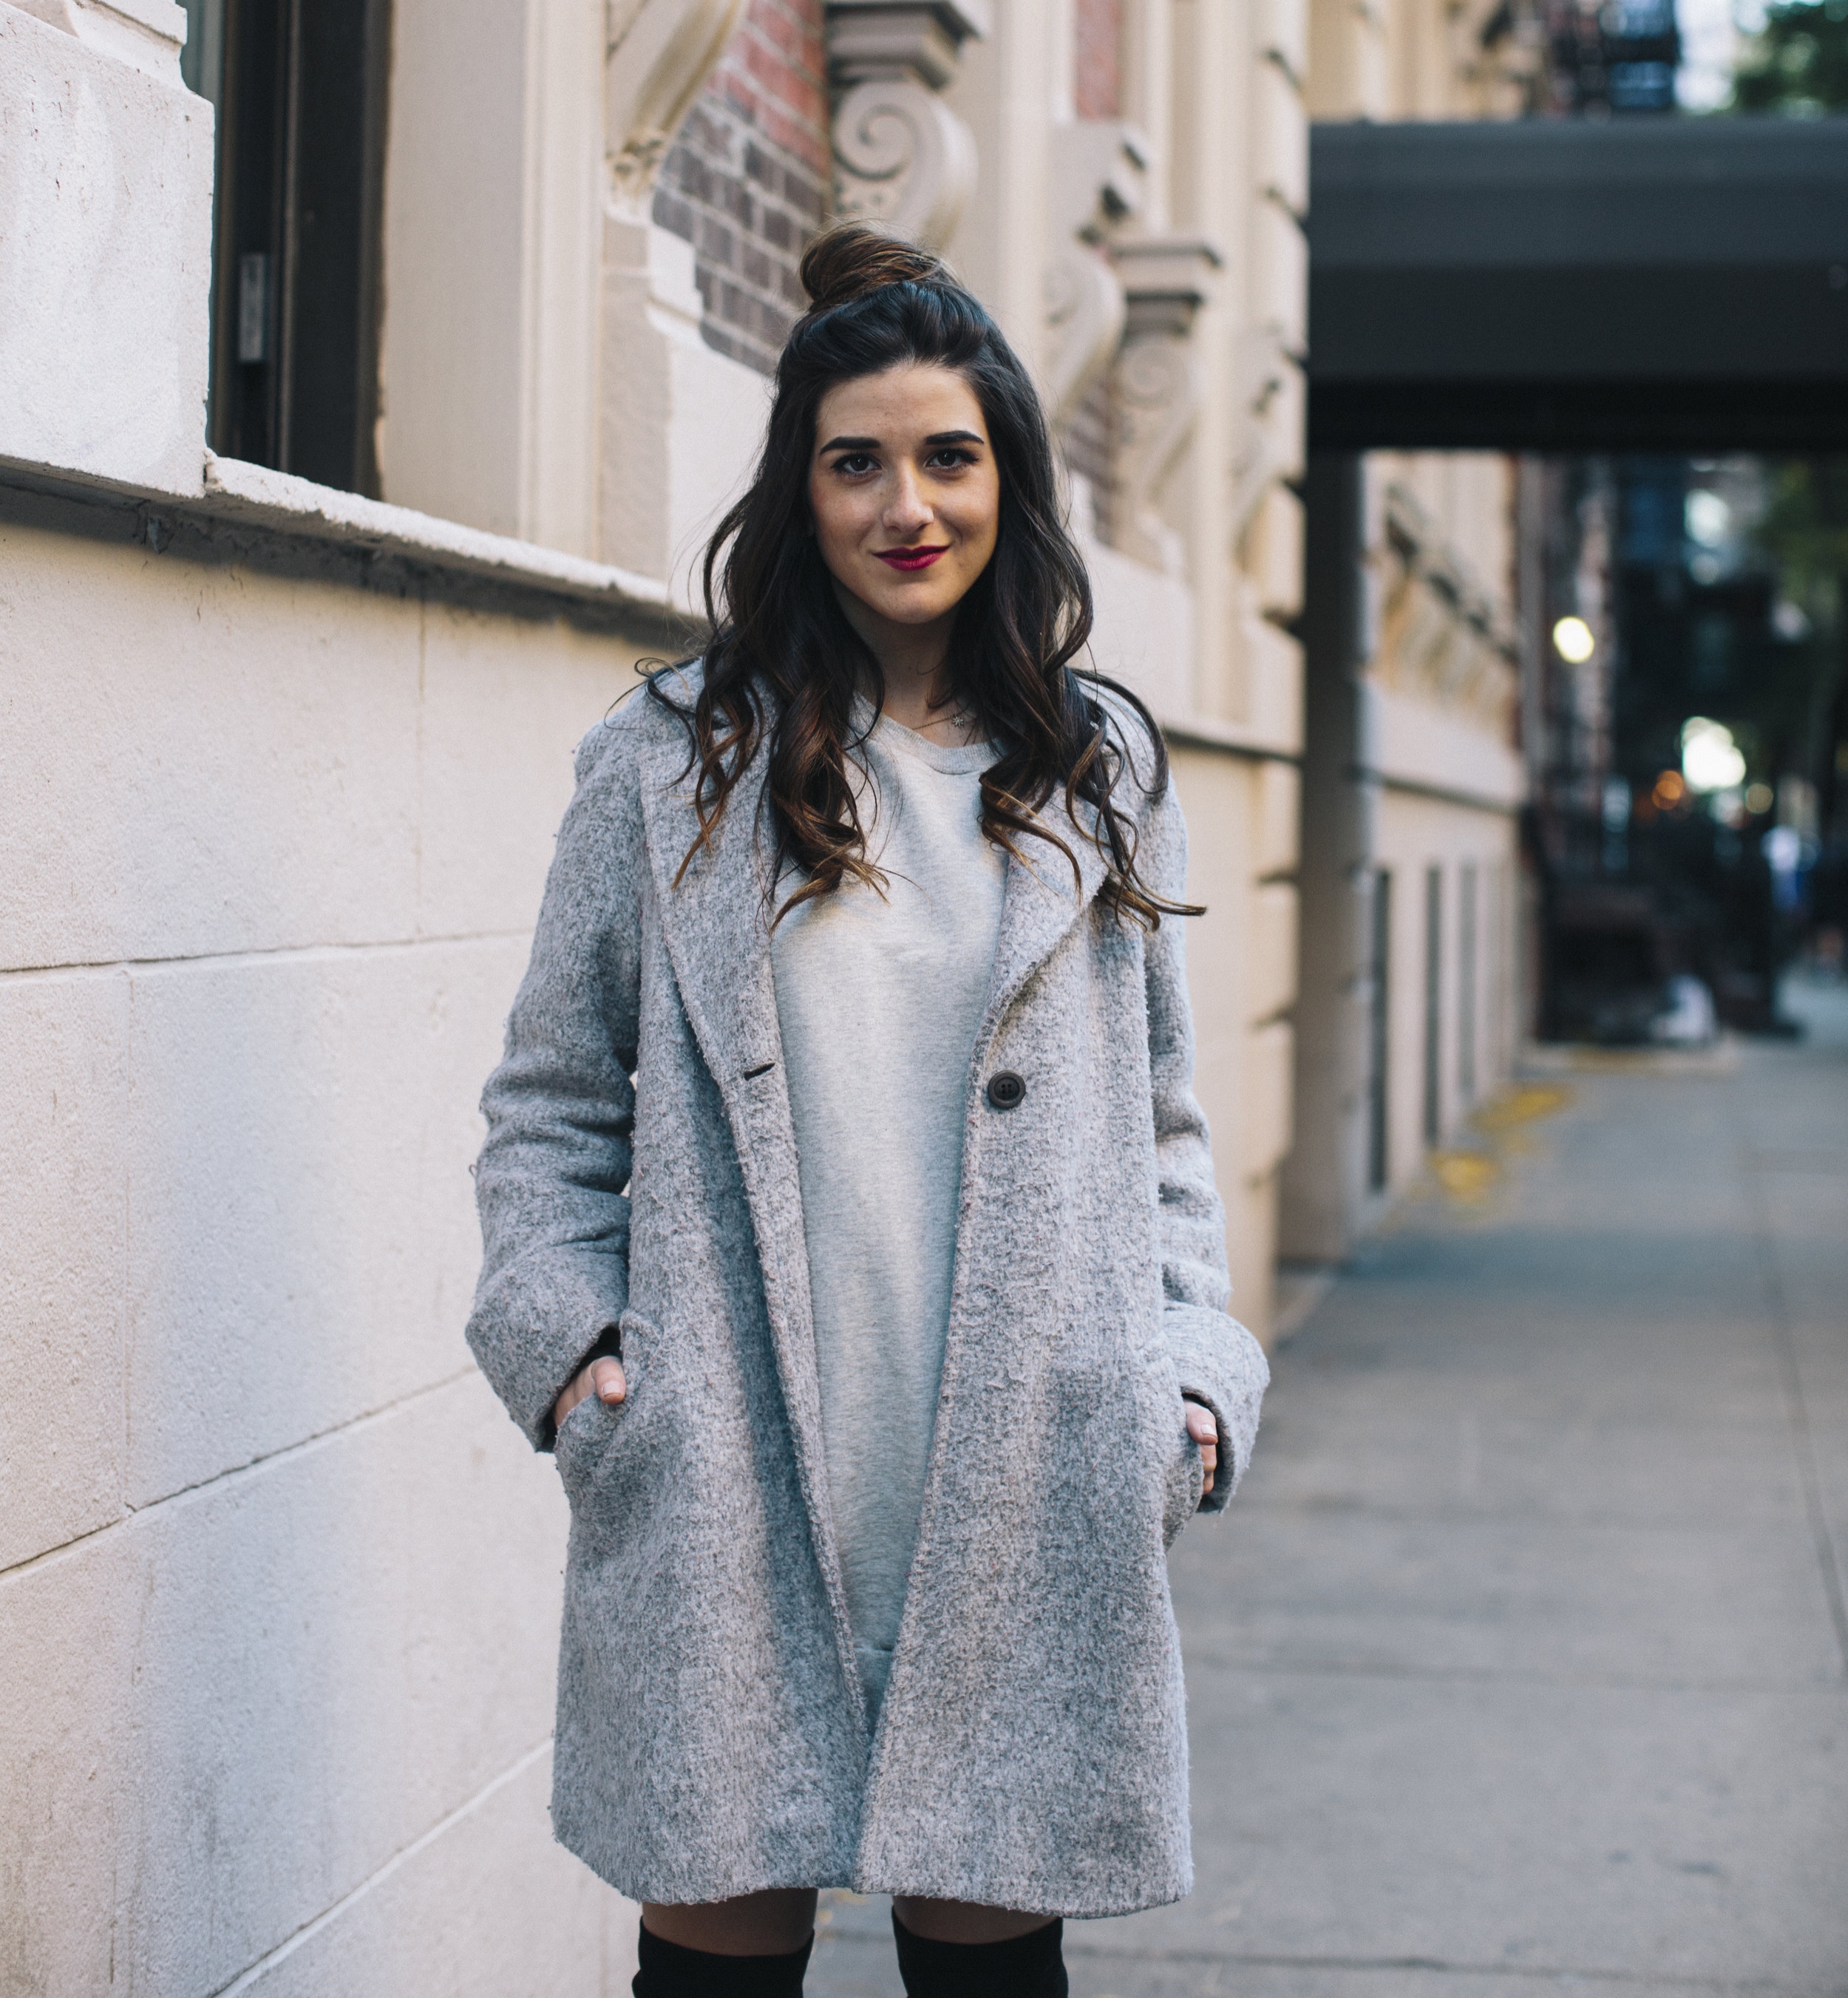 All Grey Look OTK Boots Why I Hate Fashion Week Esther Santer Fashion Blog Louboutins & Love NYC Street Style Blogger Outfit OOTD Trendy Sweatshirt Dress Topknot Coat Women Girl Shoes Shopping Zara Accessories Beauty Monochome Wear Clothes Winter Look.jpg